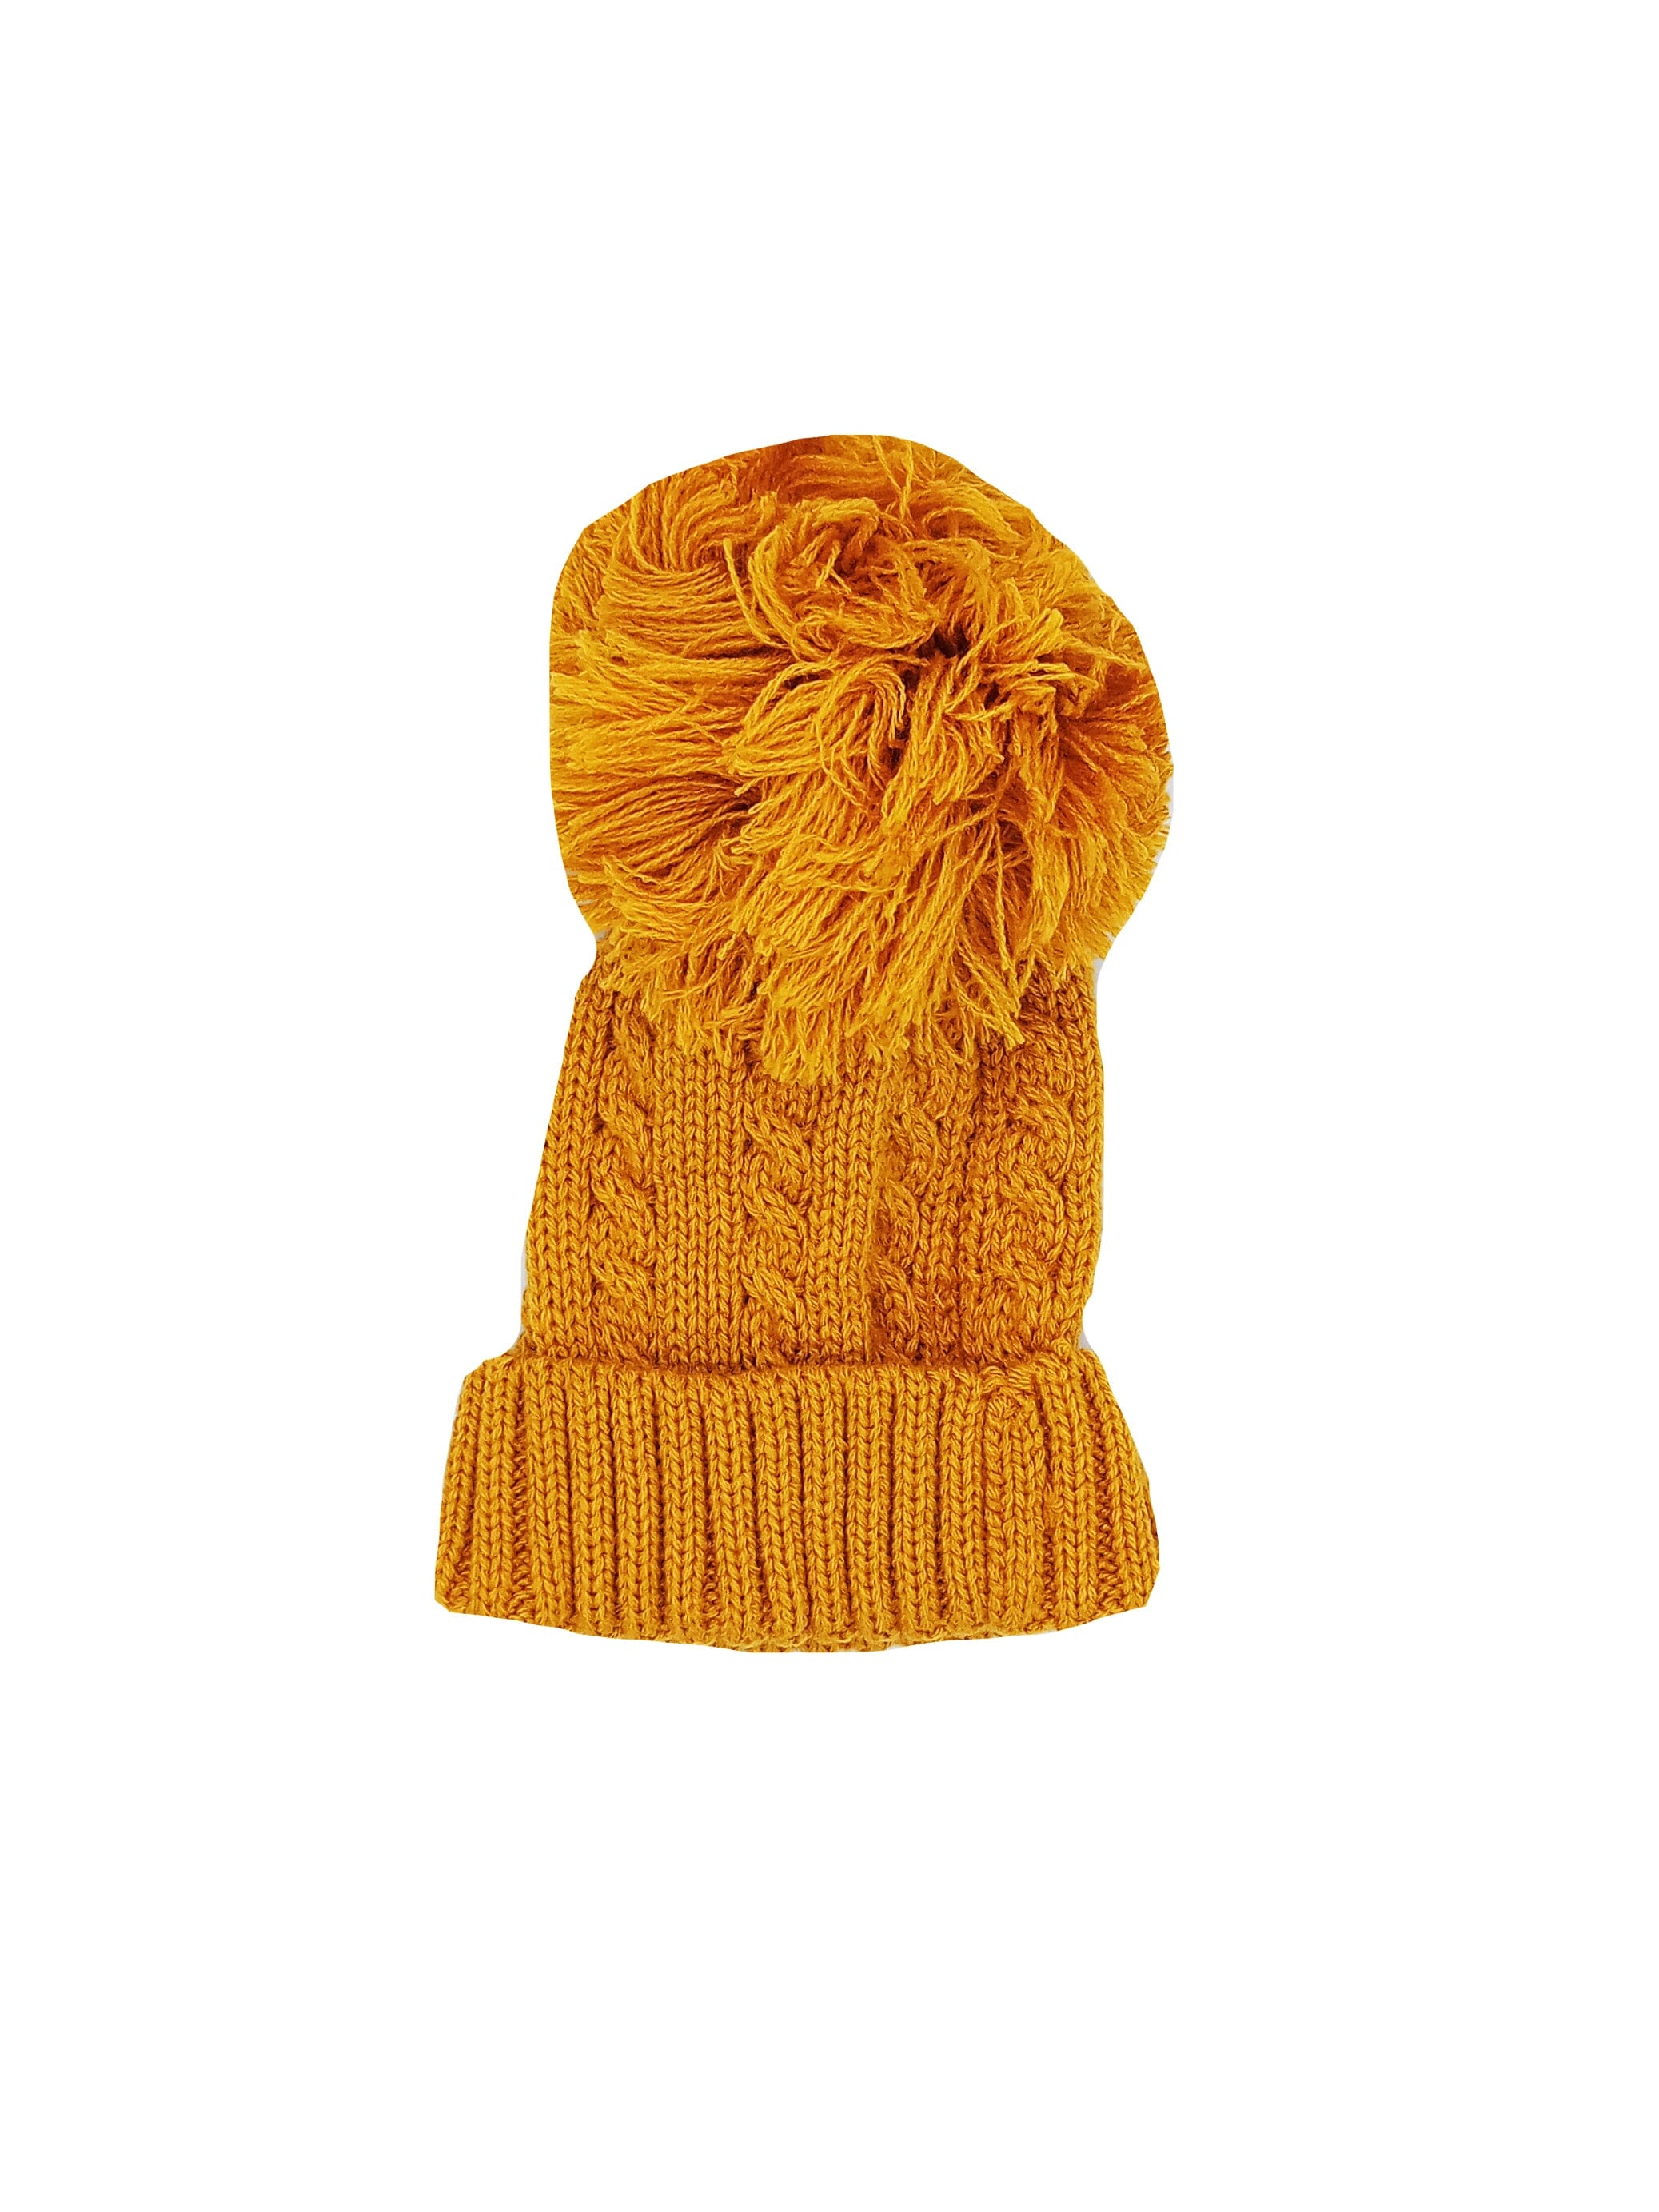 Mustard Cable Knitted Pom Pom Hat Hat Little Mouse Baby Clothing and Gifts Ltd 